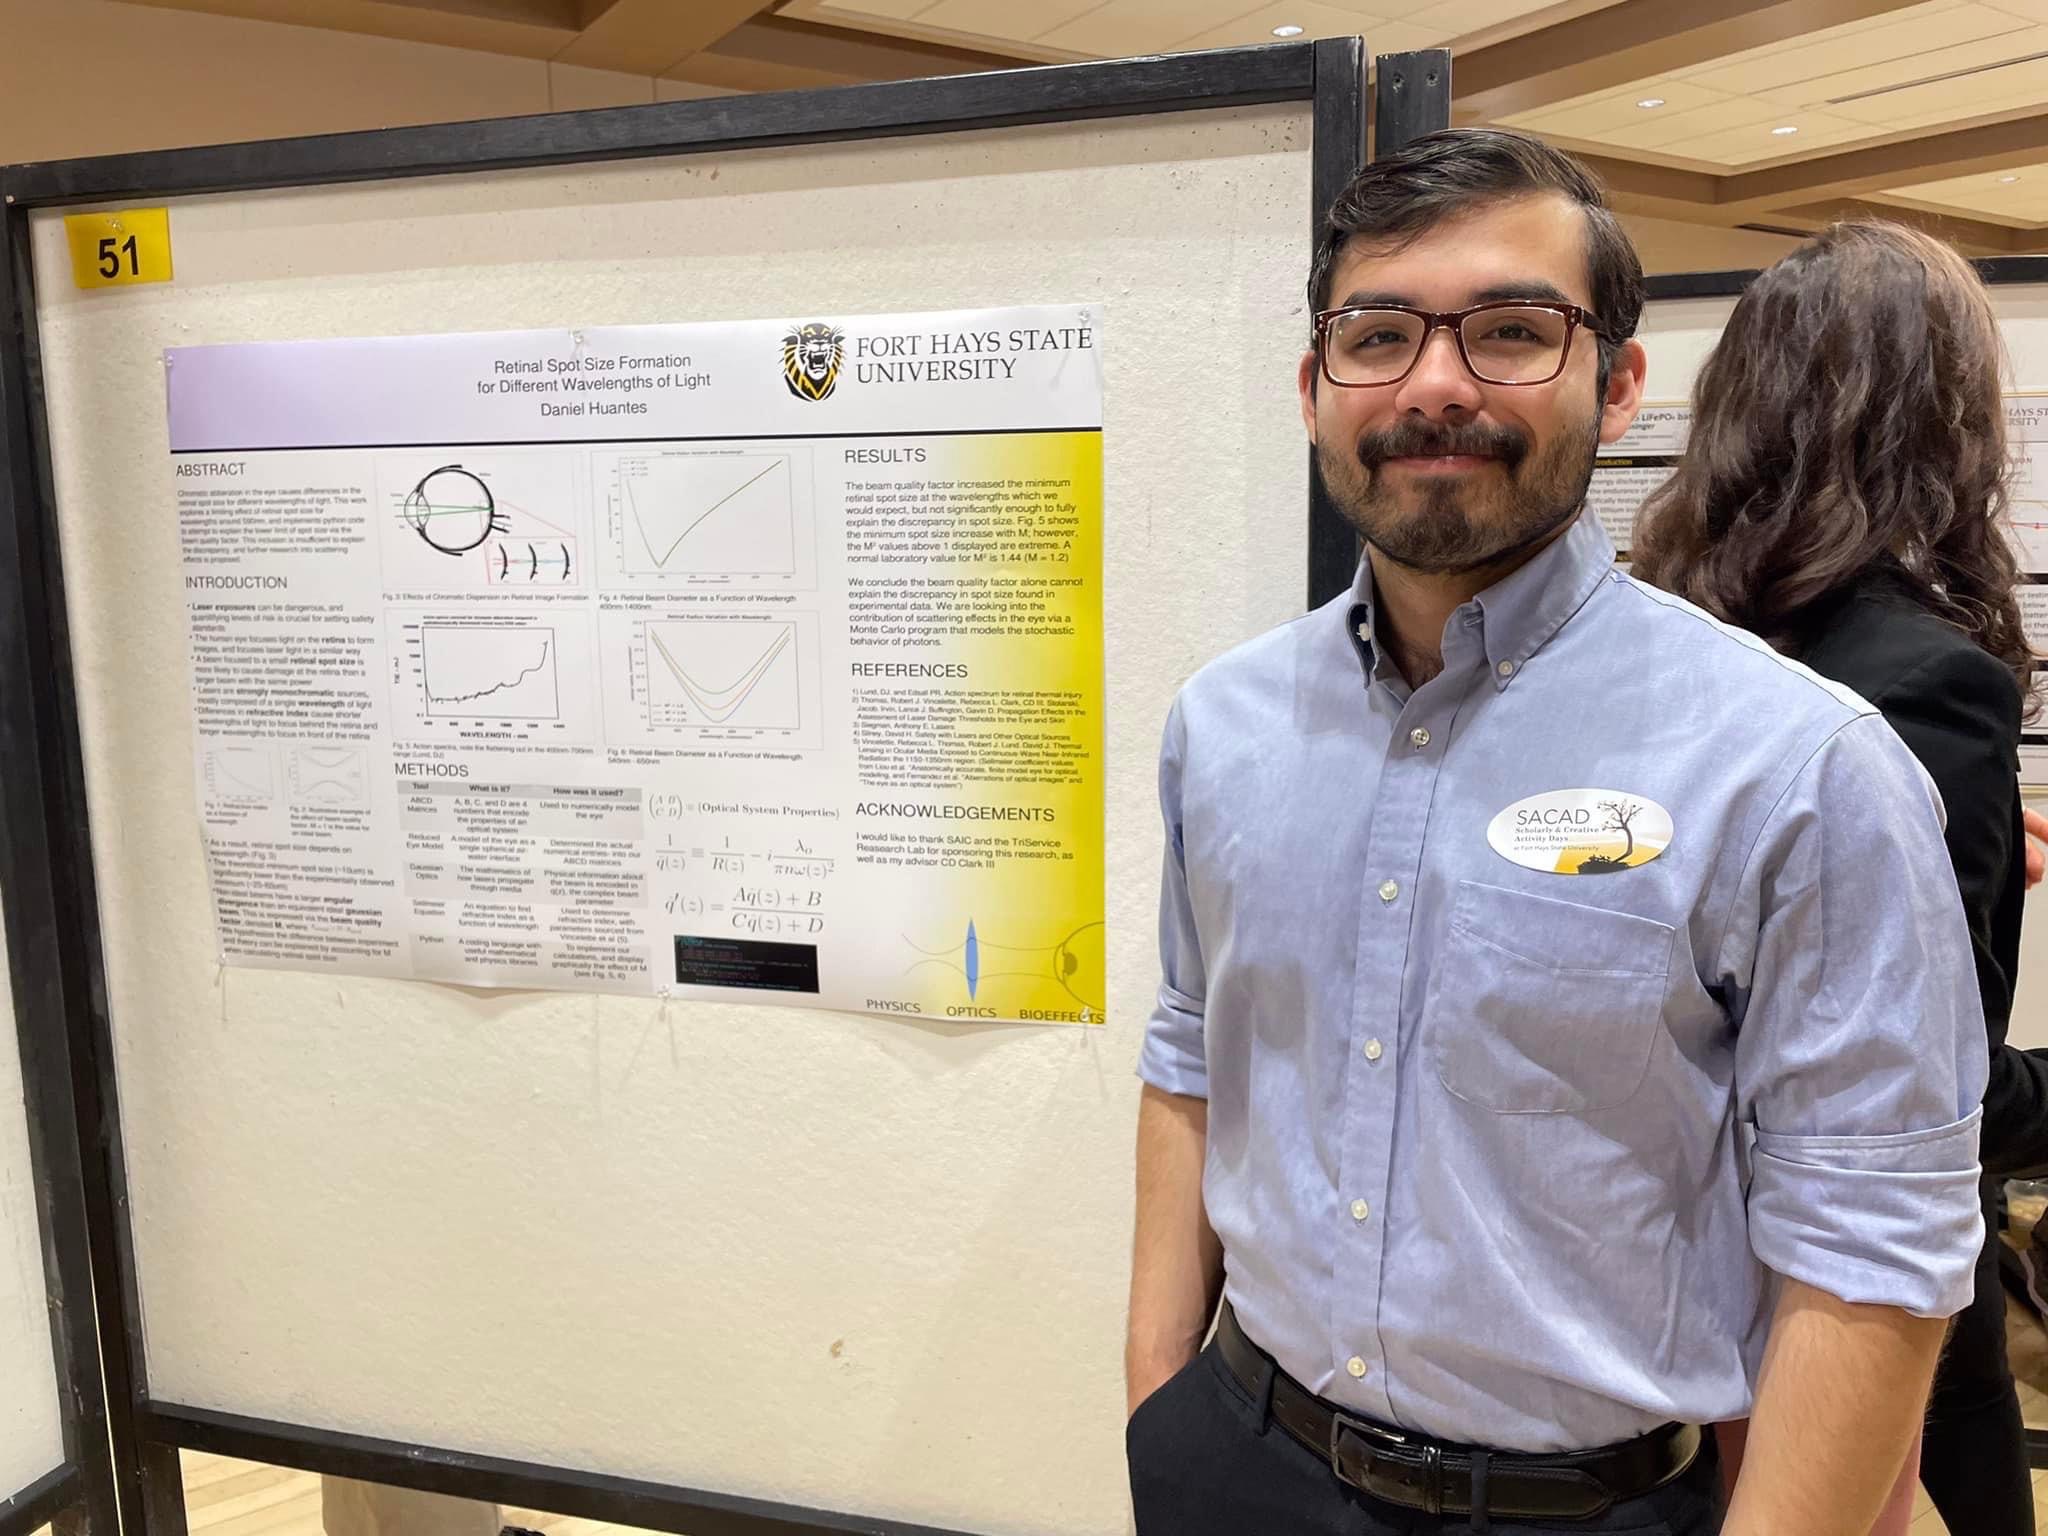 Daniel Huantes presented research on retinal spot size formation at FHSU’s Scholarly and Creative Activities Day in April